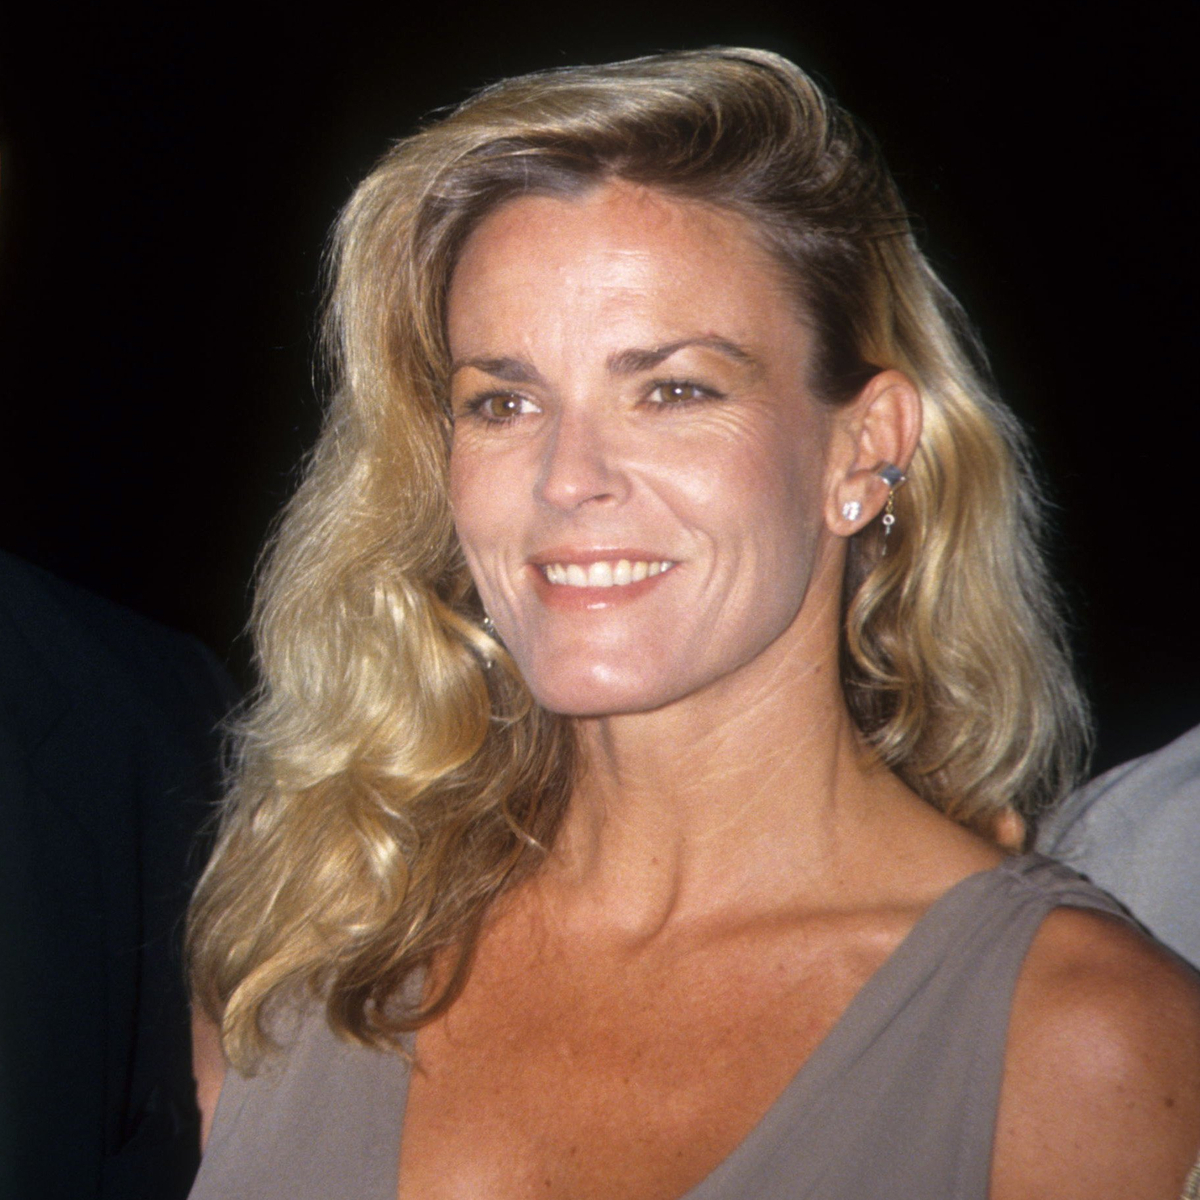 Inside the Tragic Life of Nicole Brown Simpson and Her Hopeful Final Days After Divorcing O.J. Simpson